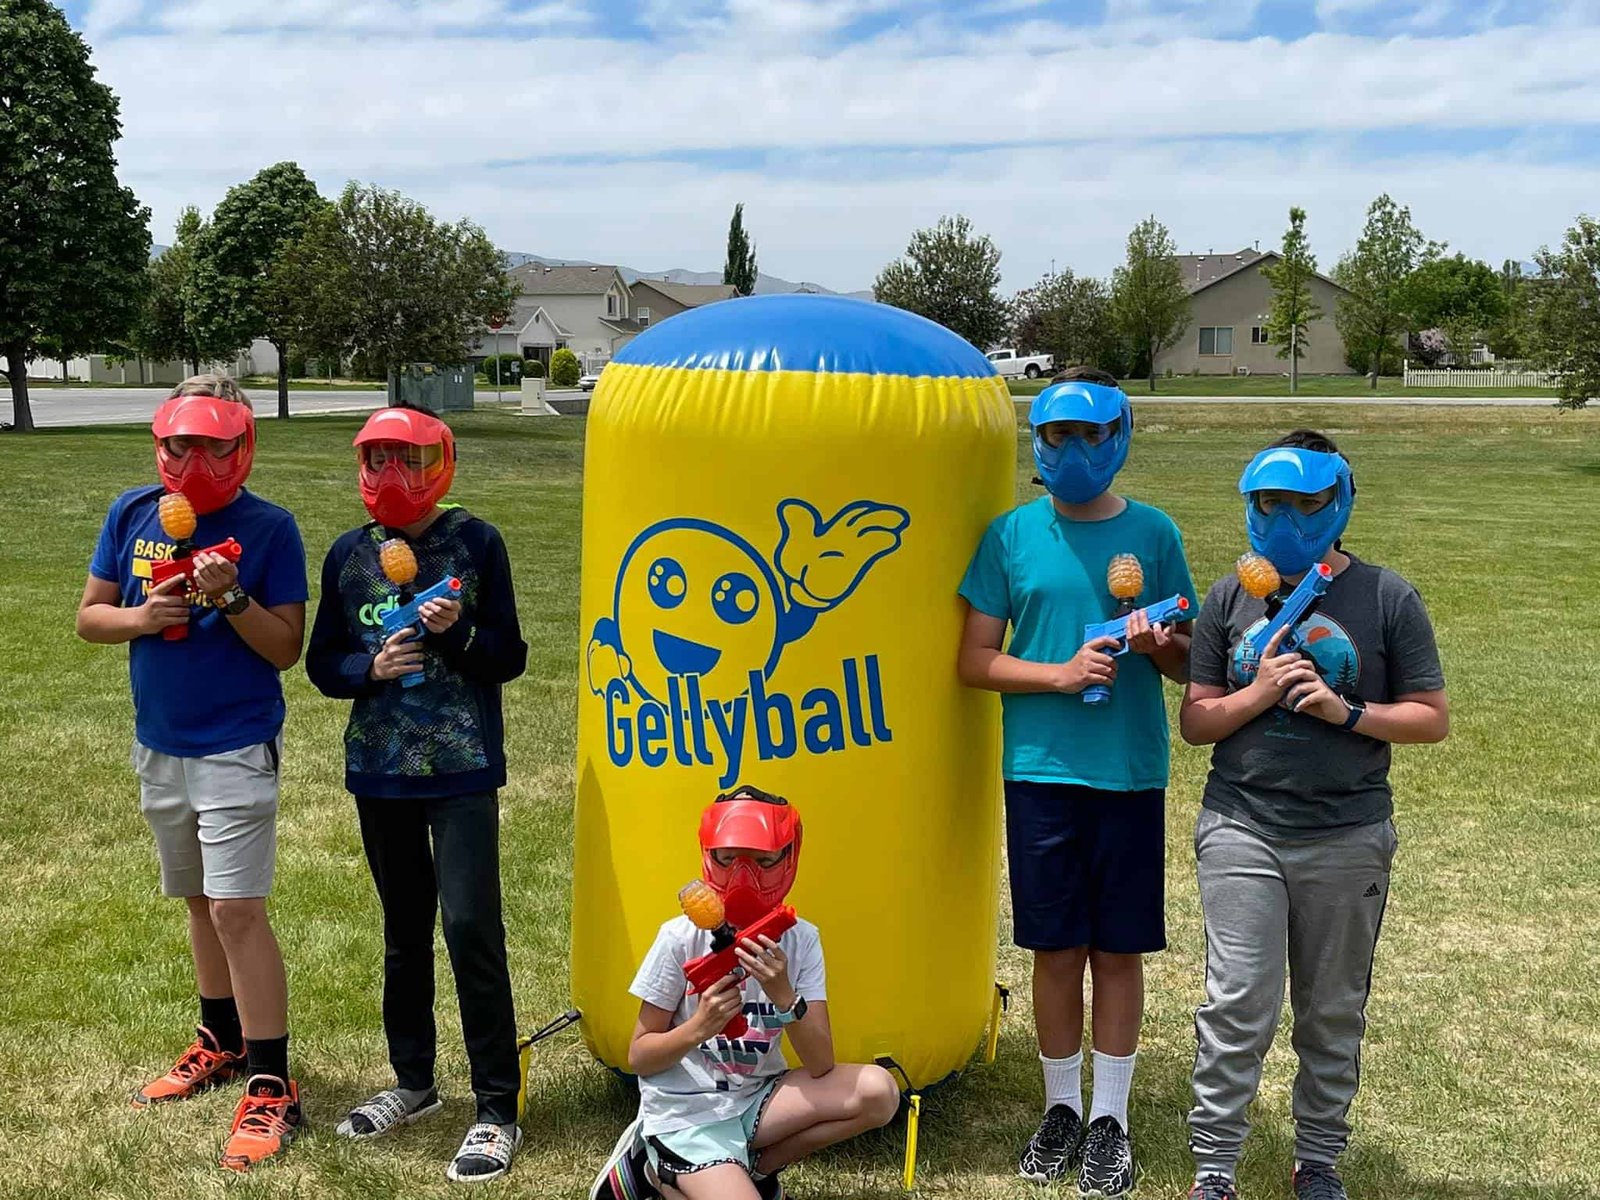 Outdoor GellyBall Party with GellyBall bunker